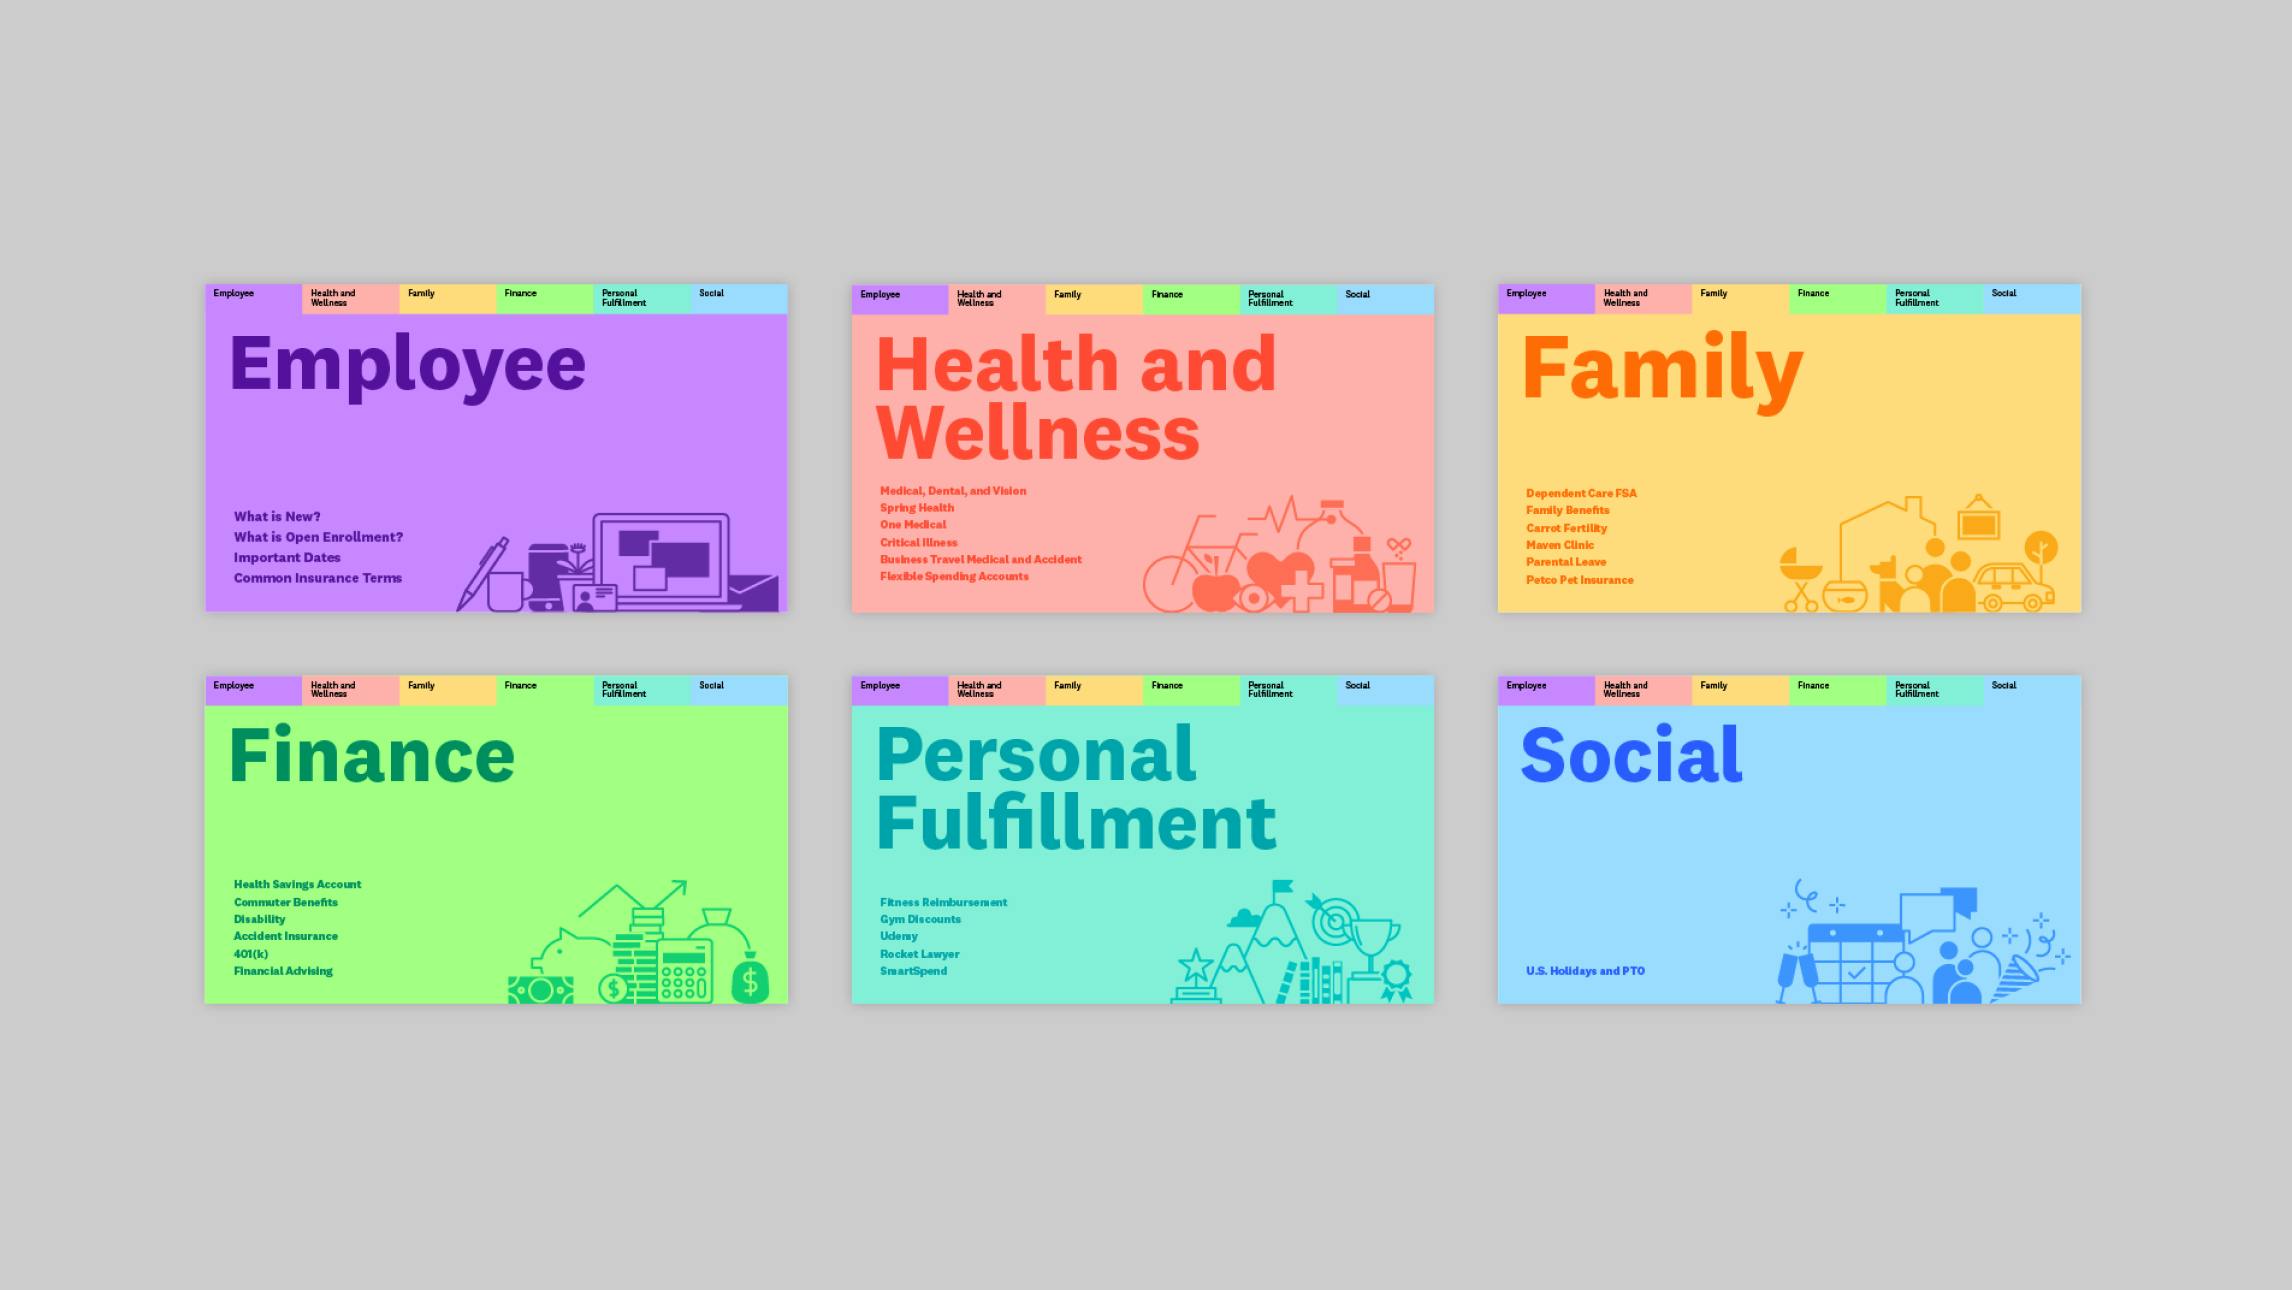 Illustrated files representative of the kinds of benefits offered to Datadog employees, each with a theme, arranged in two rows of three on a light gray background. From top left: Employee(purple), Health and Wellness(peach), Family(orange), Finanace(green), Personal Fulfillment(teal), Social(blue).